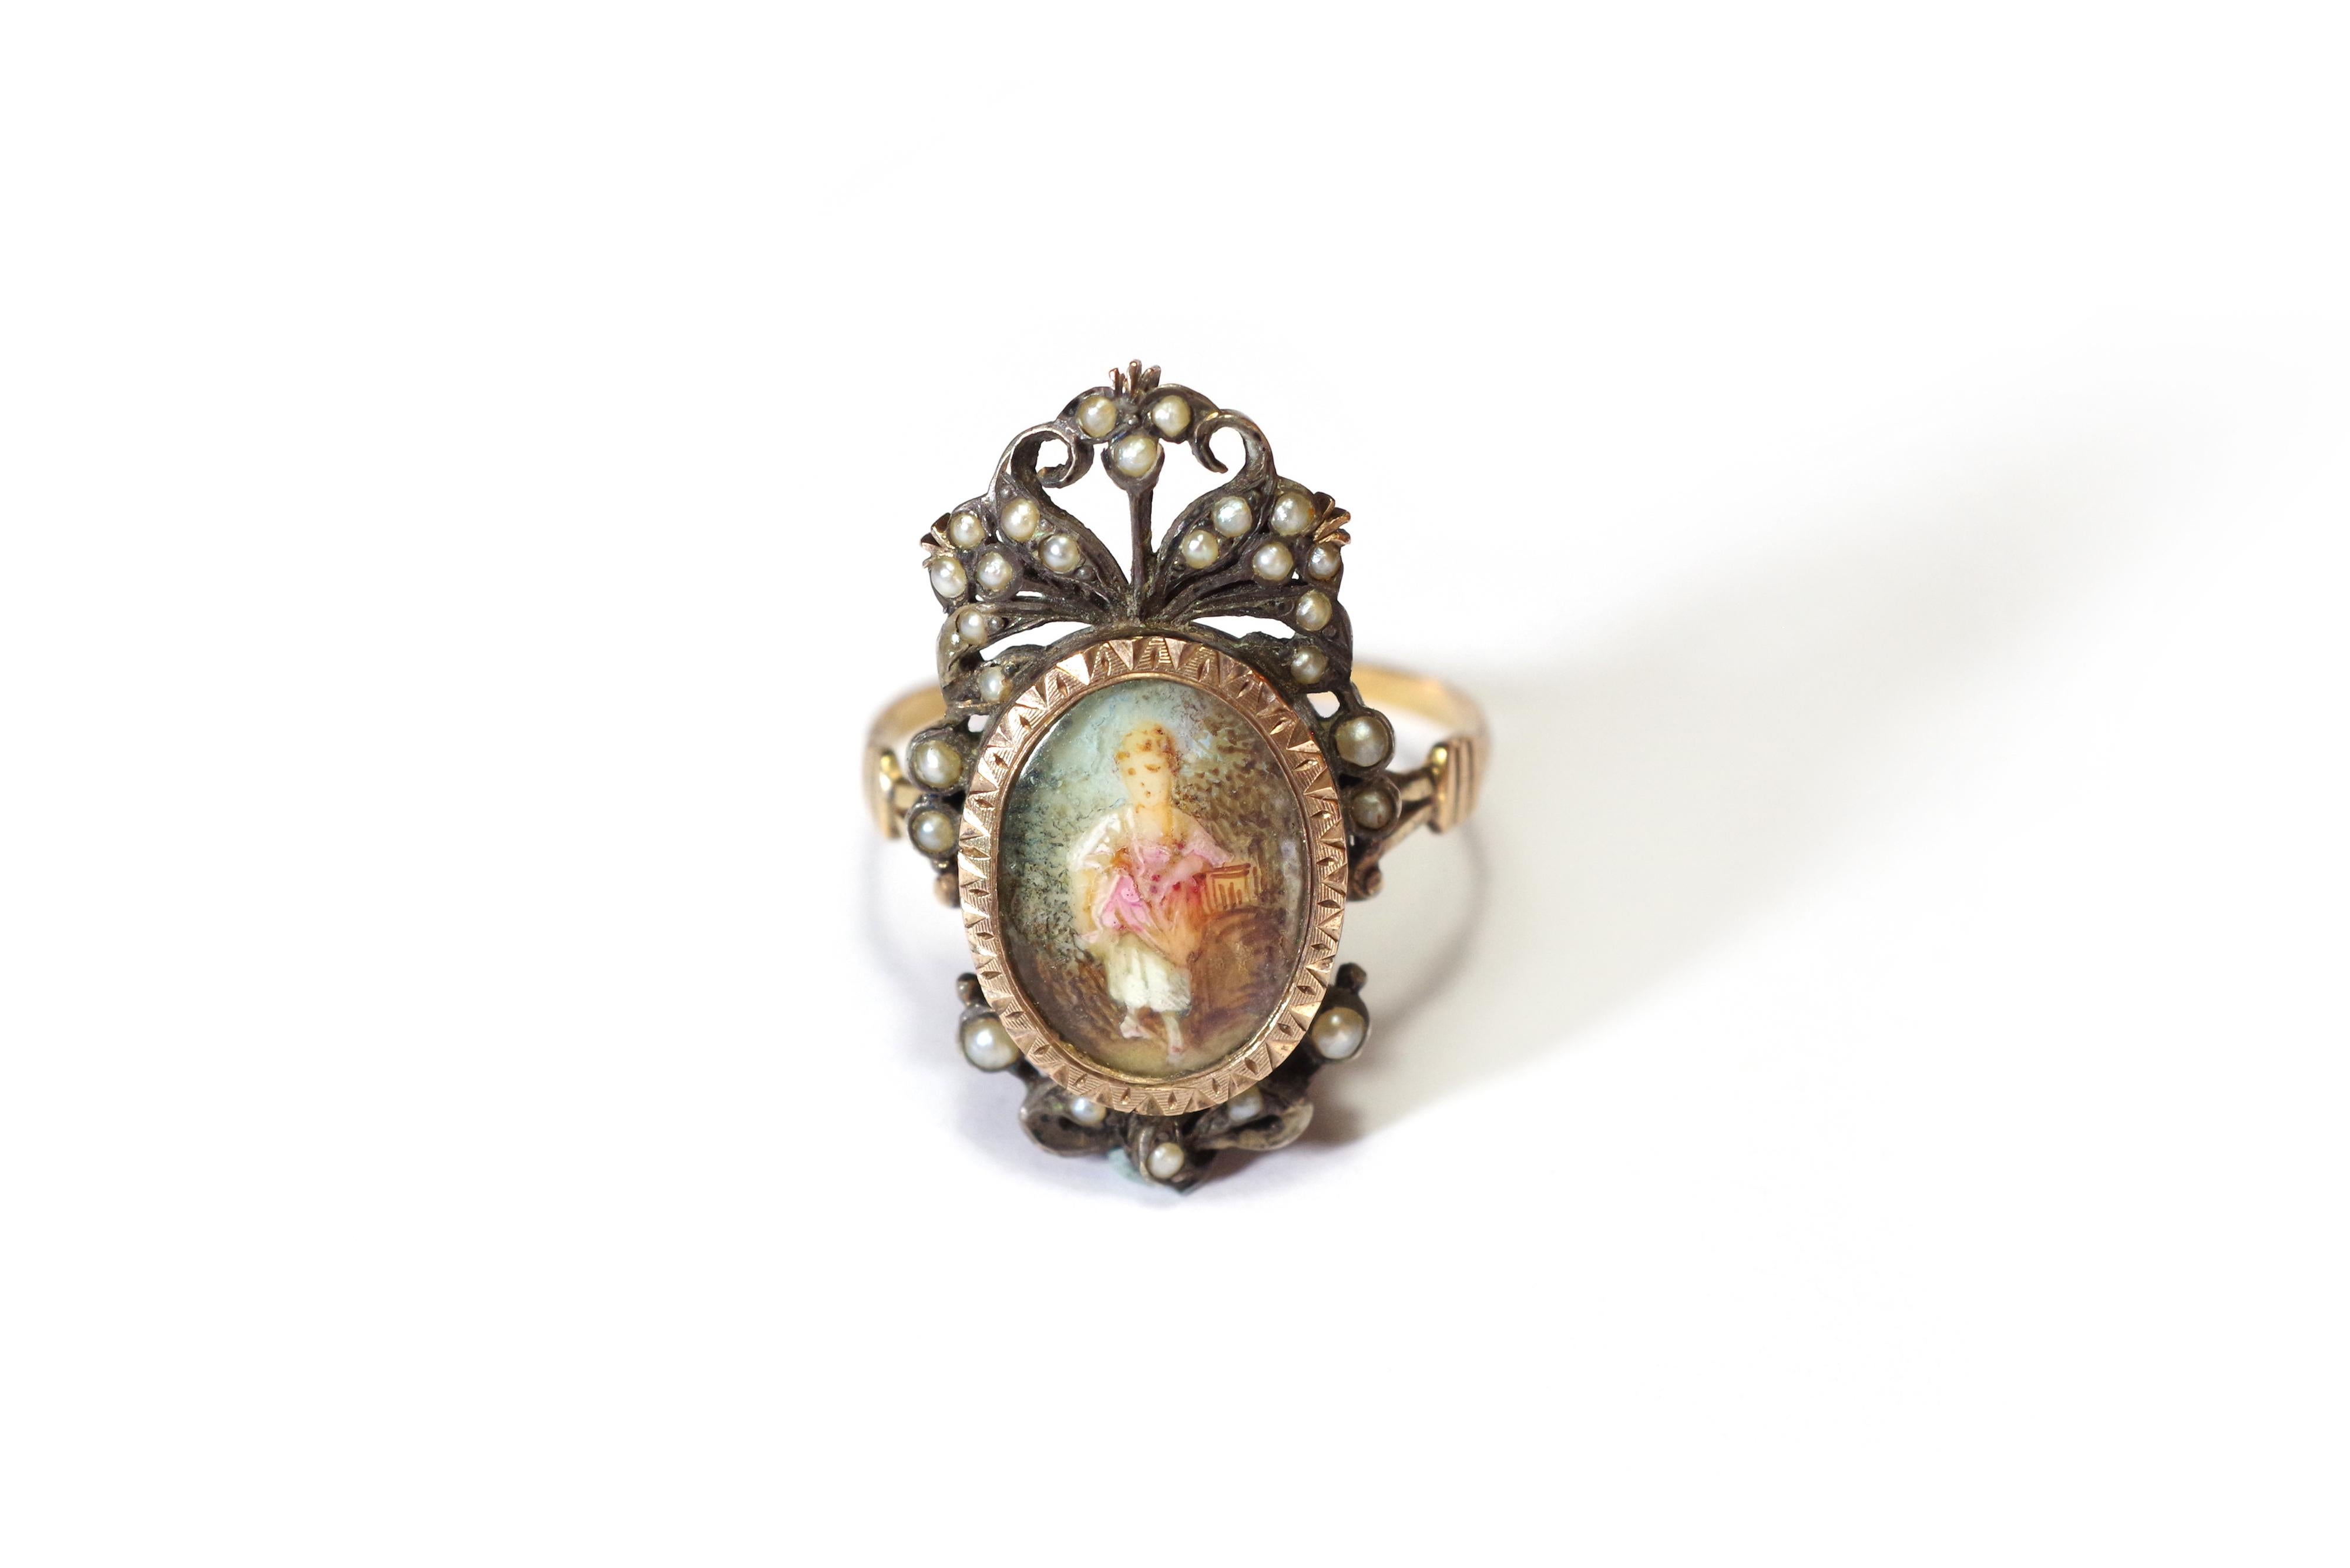 Georgian maiden portrait ring in rose gold 18 karats and silver. Antique ring composed of a miniature on vellum under a glass set in a rose gold medallion. The miniature represents a young girl in a garden, wearing a white dress and a pink shawl.